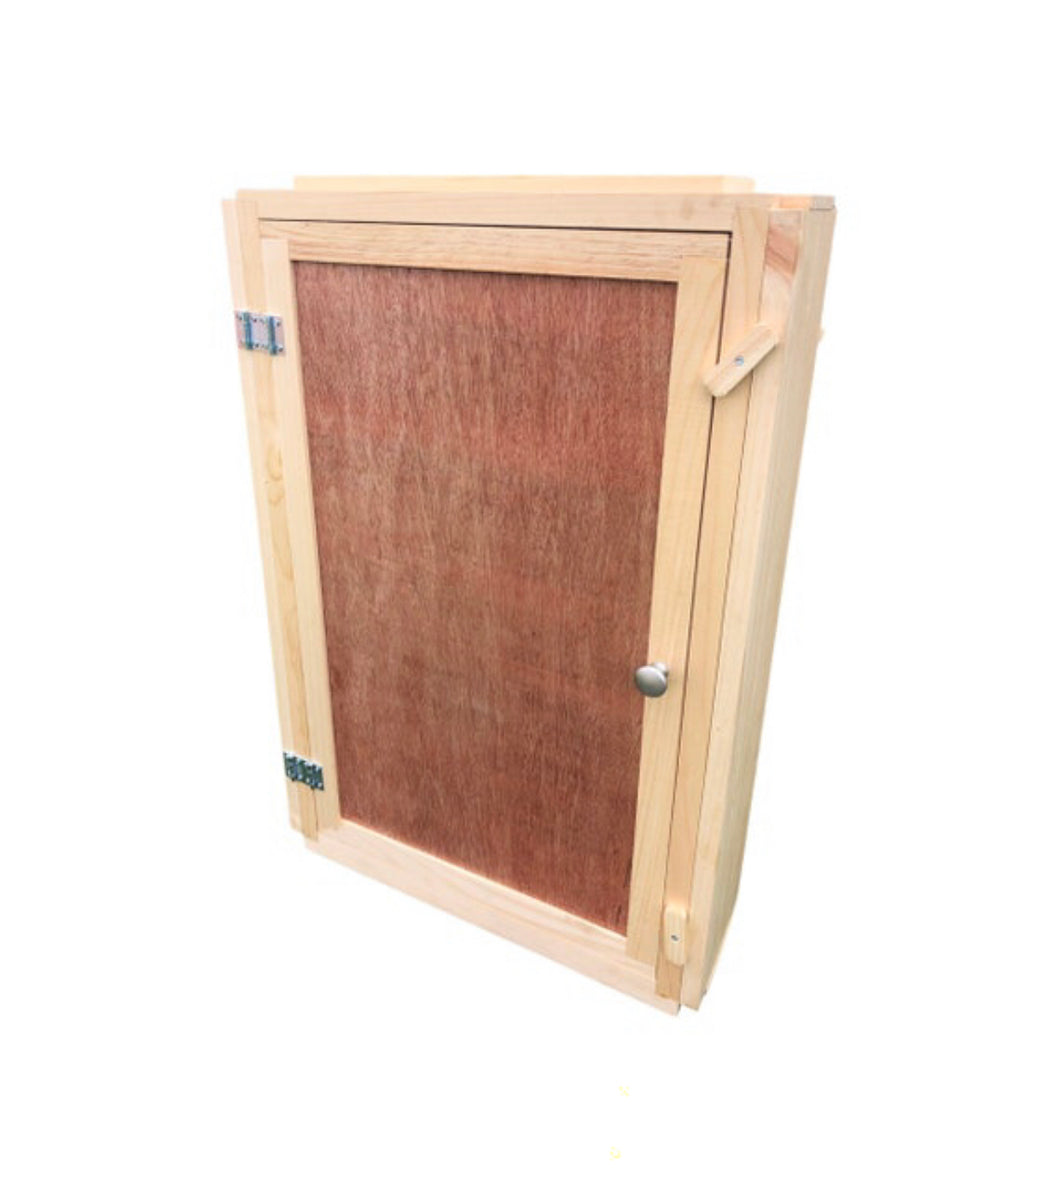 Observation Bee Hive (Holds 9 Deep Frames) with Double-side Plexi glass doors Fully Assembled FRAMES NOT INCLUDED